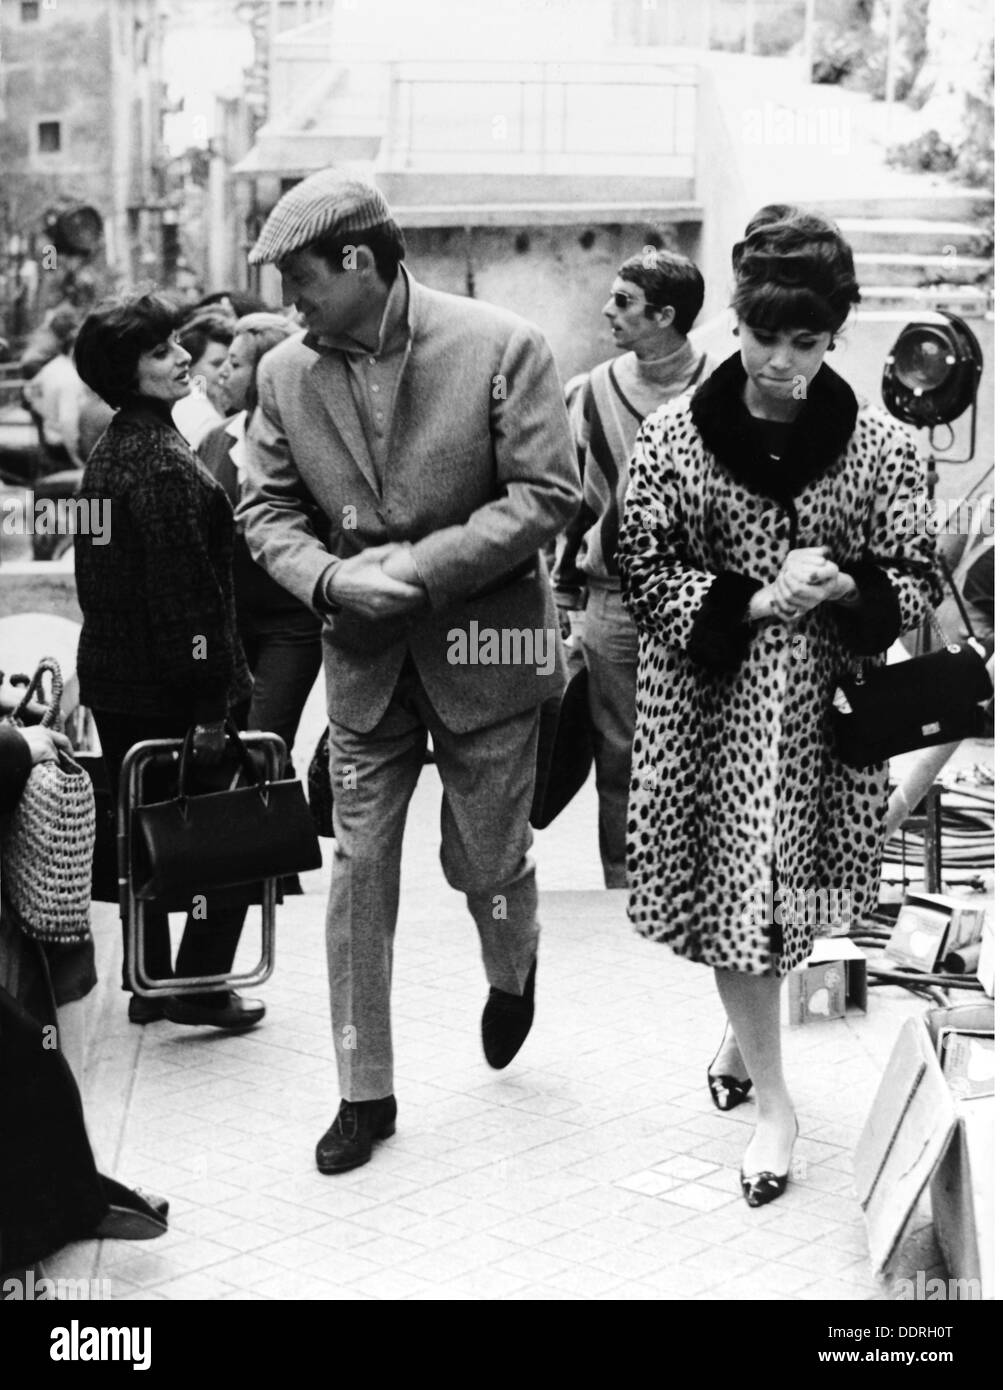 Belmondo, Jean-Paul, * 9.4.1933, French actor, half length, with first wife  Renee "Elodie" Constantin, Villefranche-sur-Mer, March 1963 Stock Photo -  Alamy